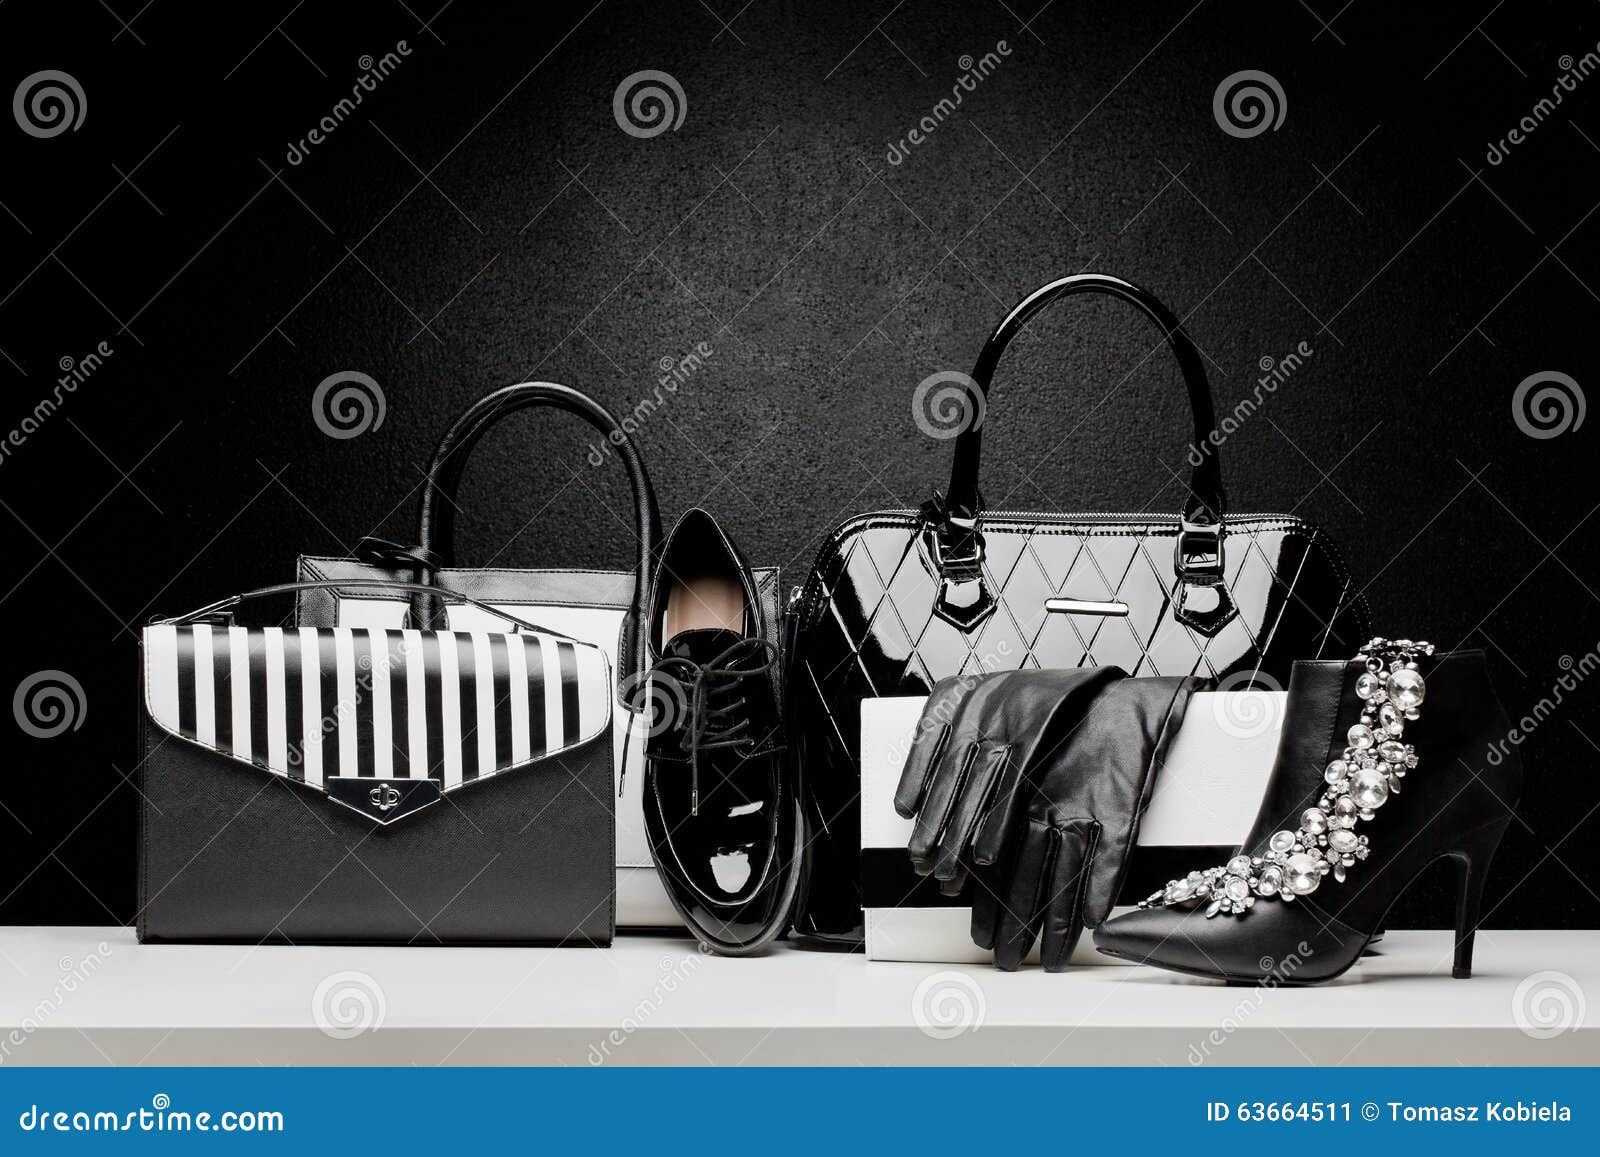 Beautiful Set of Women S Fashion Accessories on Black Background Stock ...